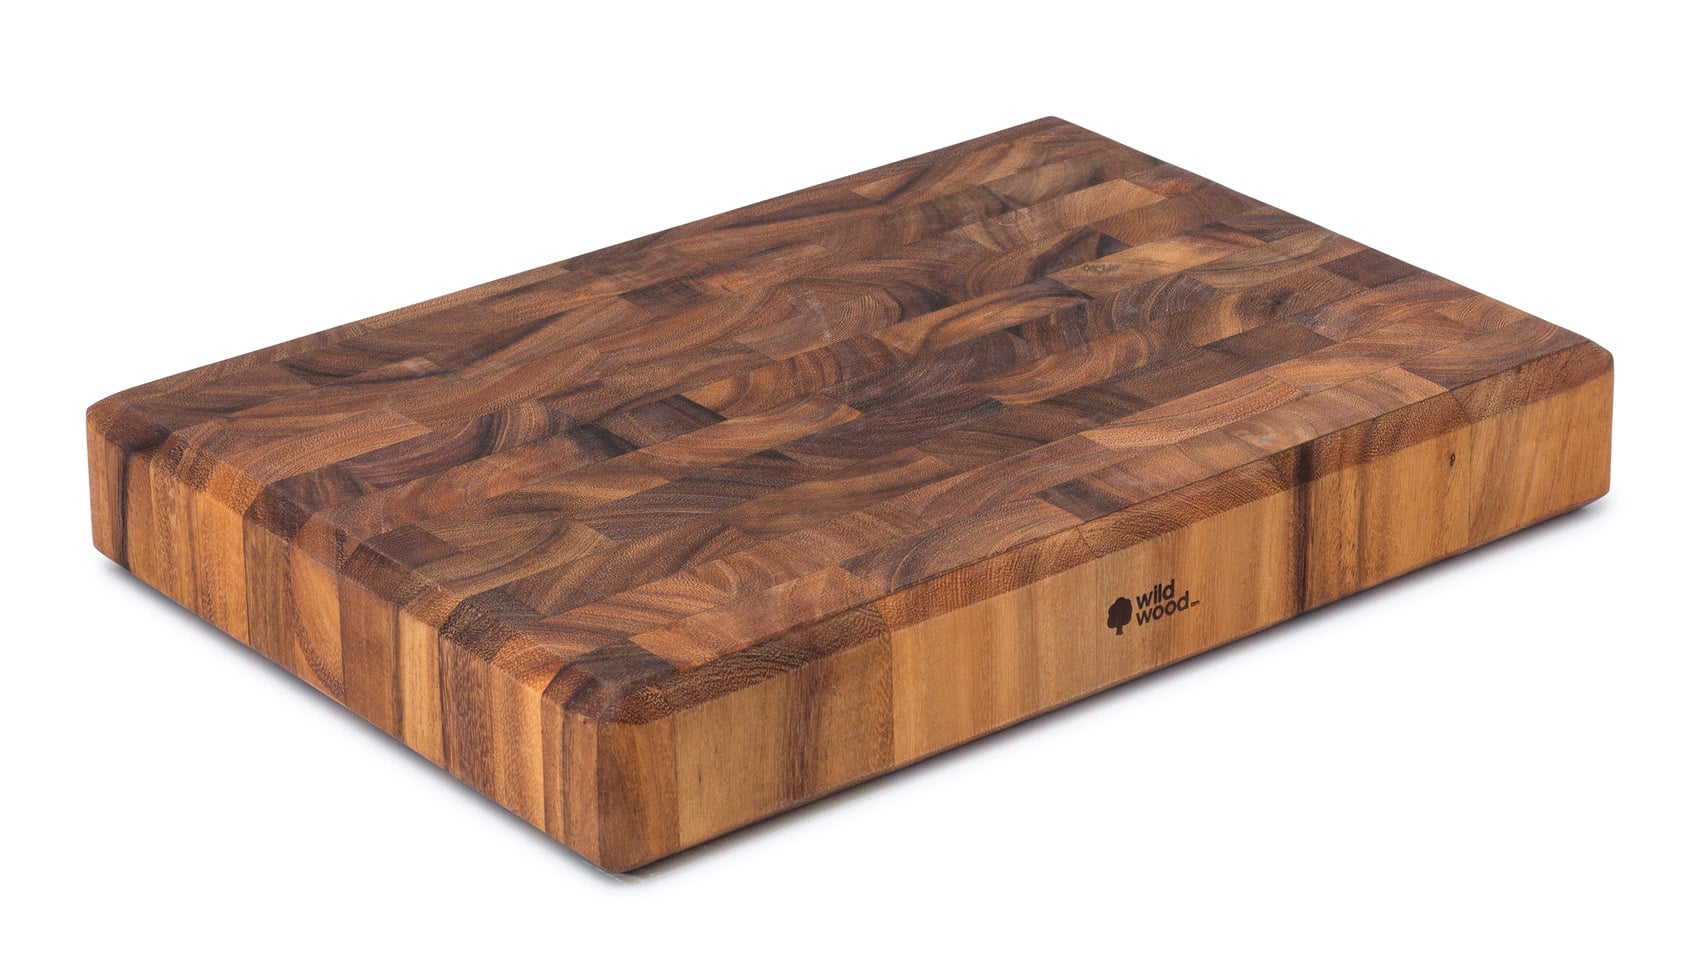 https://www.wildwood.com.au/wp-content/uploads/2019/07/WCB103_Wild-Wood-Franklin-Large-Thick-End-Grain-Butchers-Style-Cutting_Chopping-Board_high-res.jpg